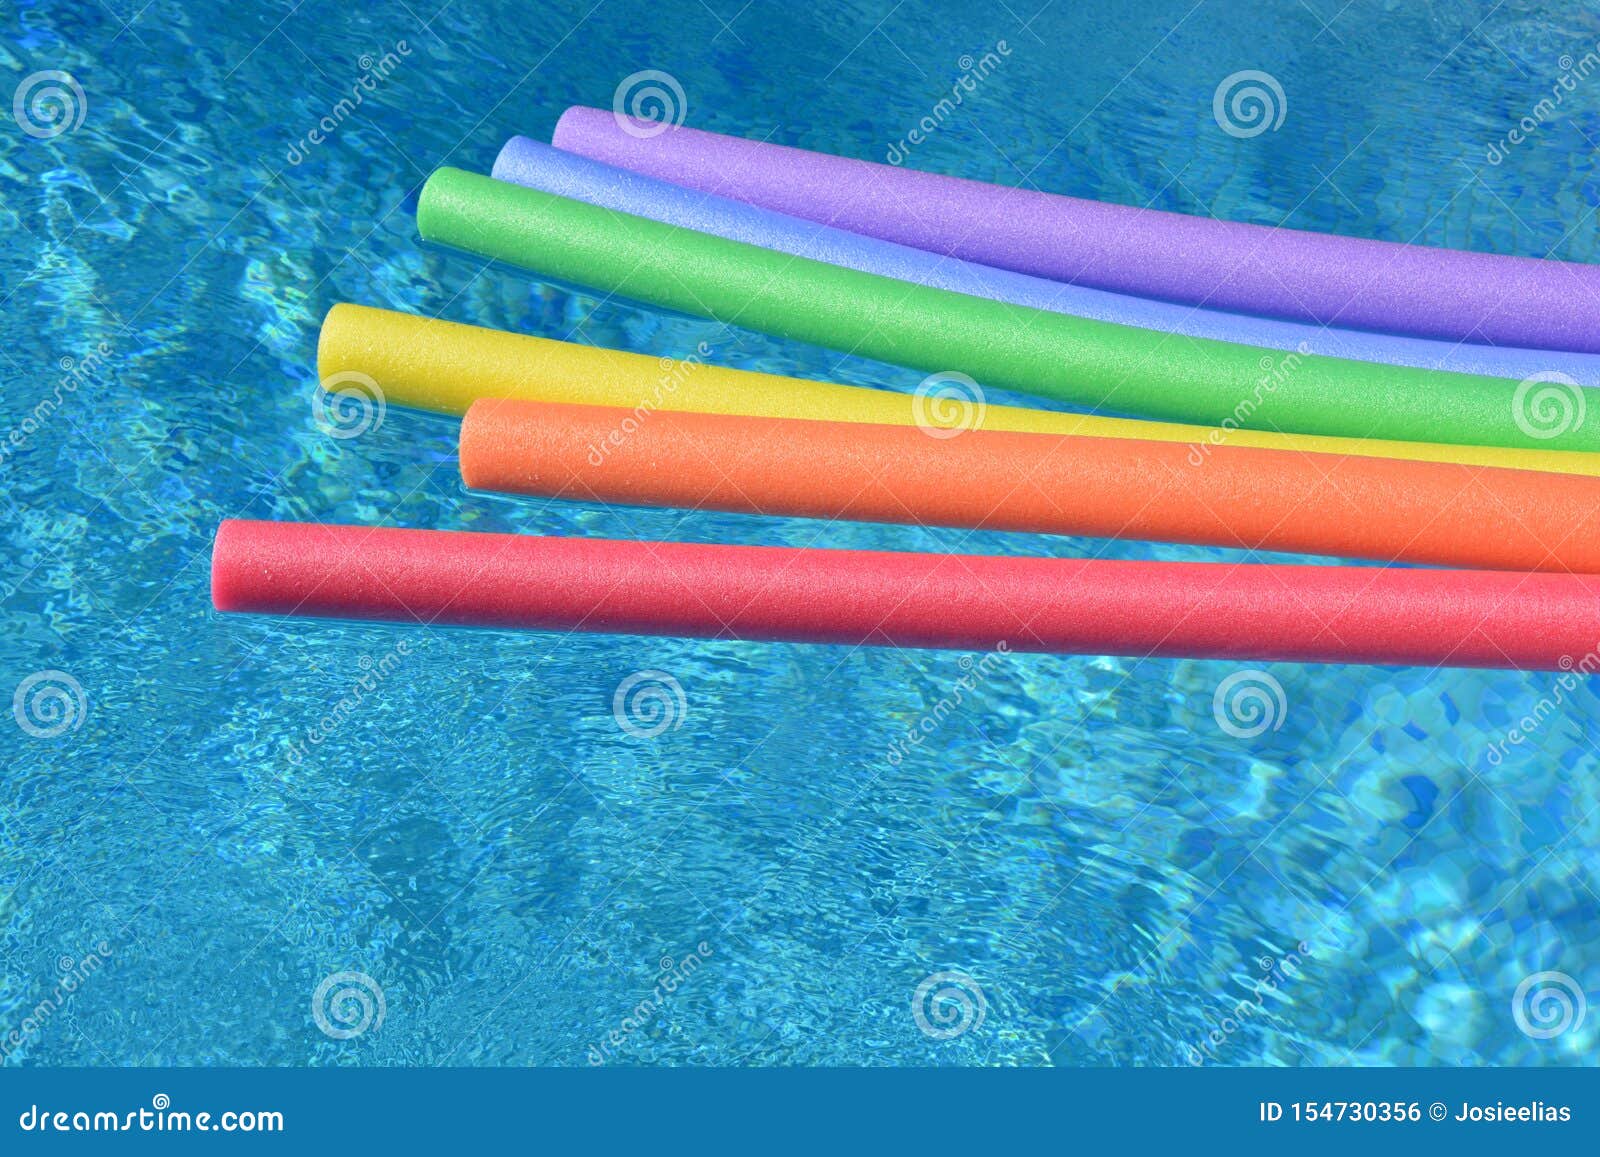 swimming pool noodle float